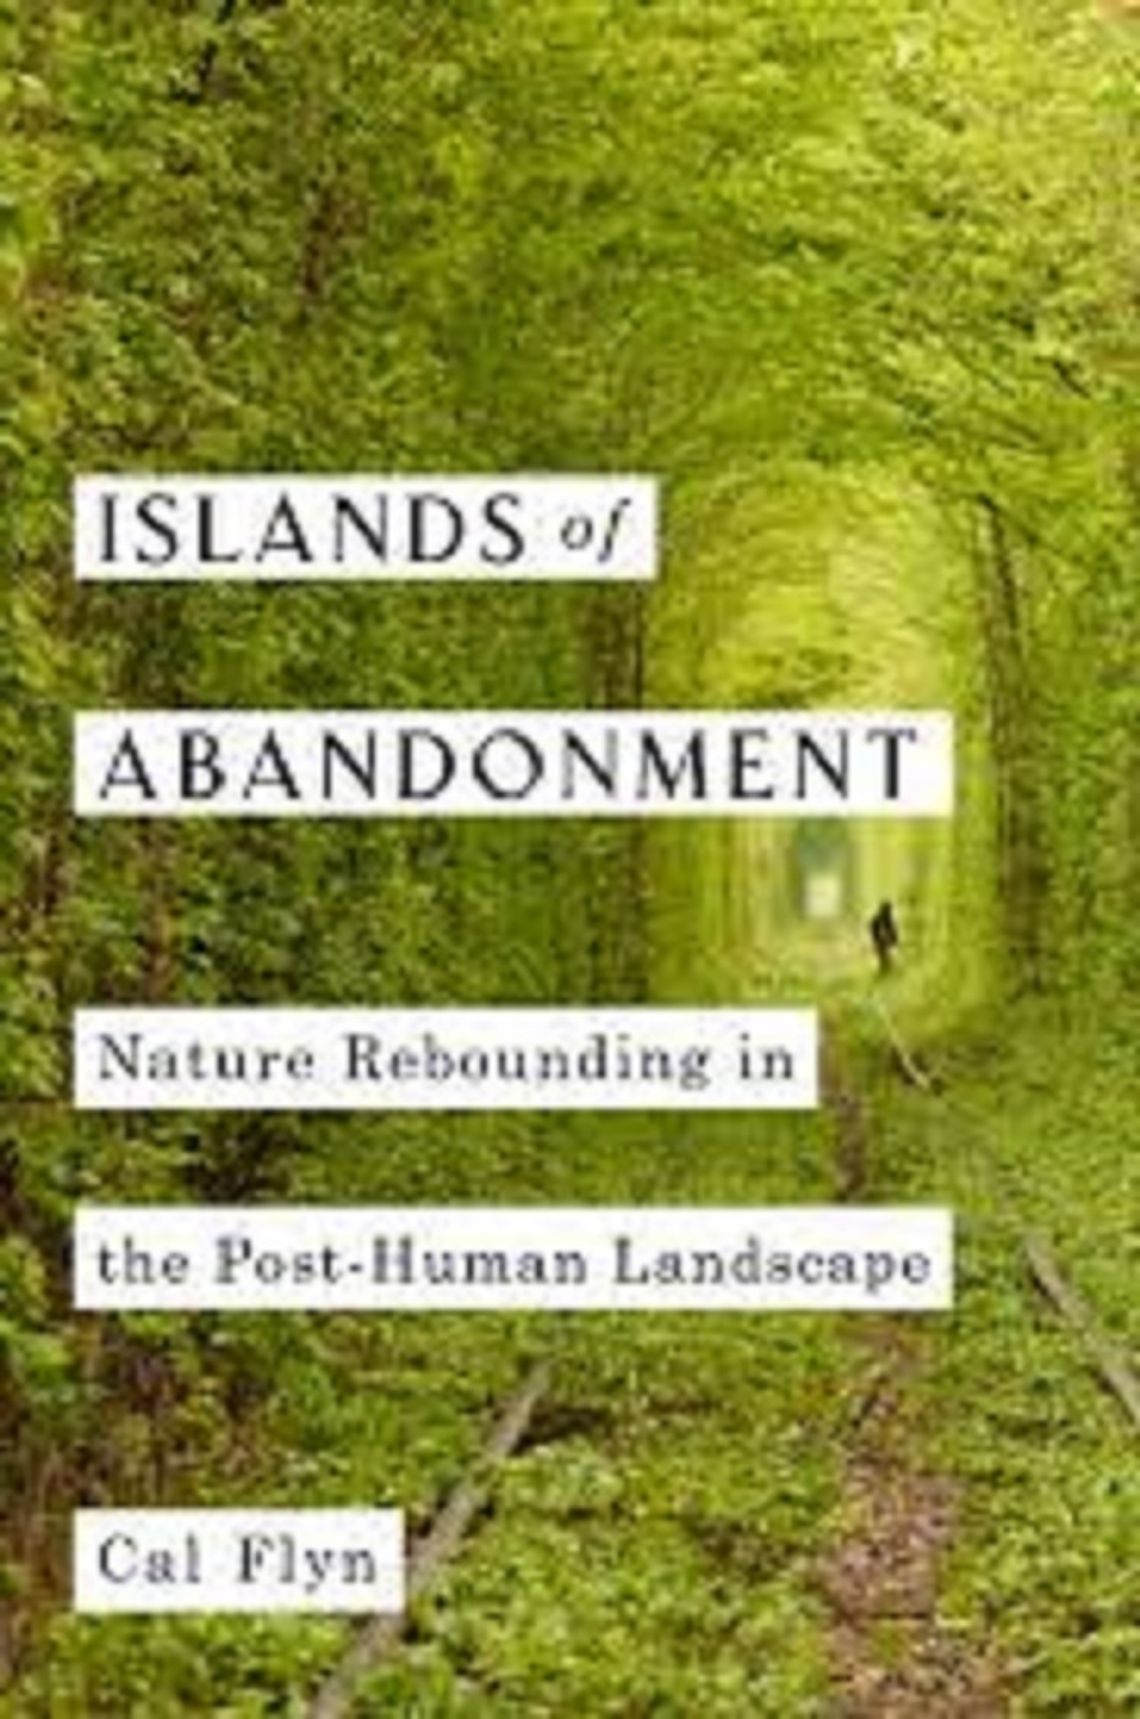 Book Review  - Islands of Abandonment: Nature Rebounding in the Post-Human Landscape by Cal Flyn